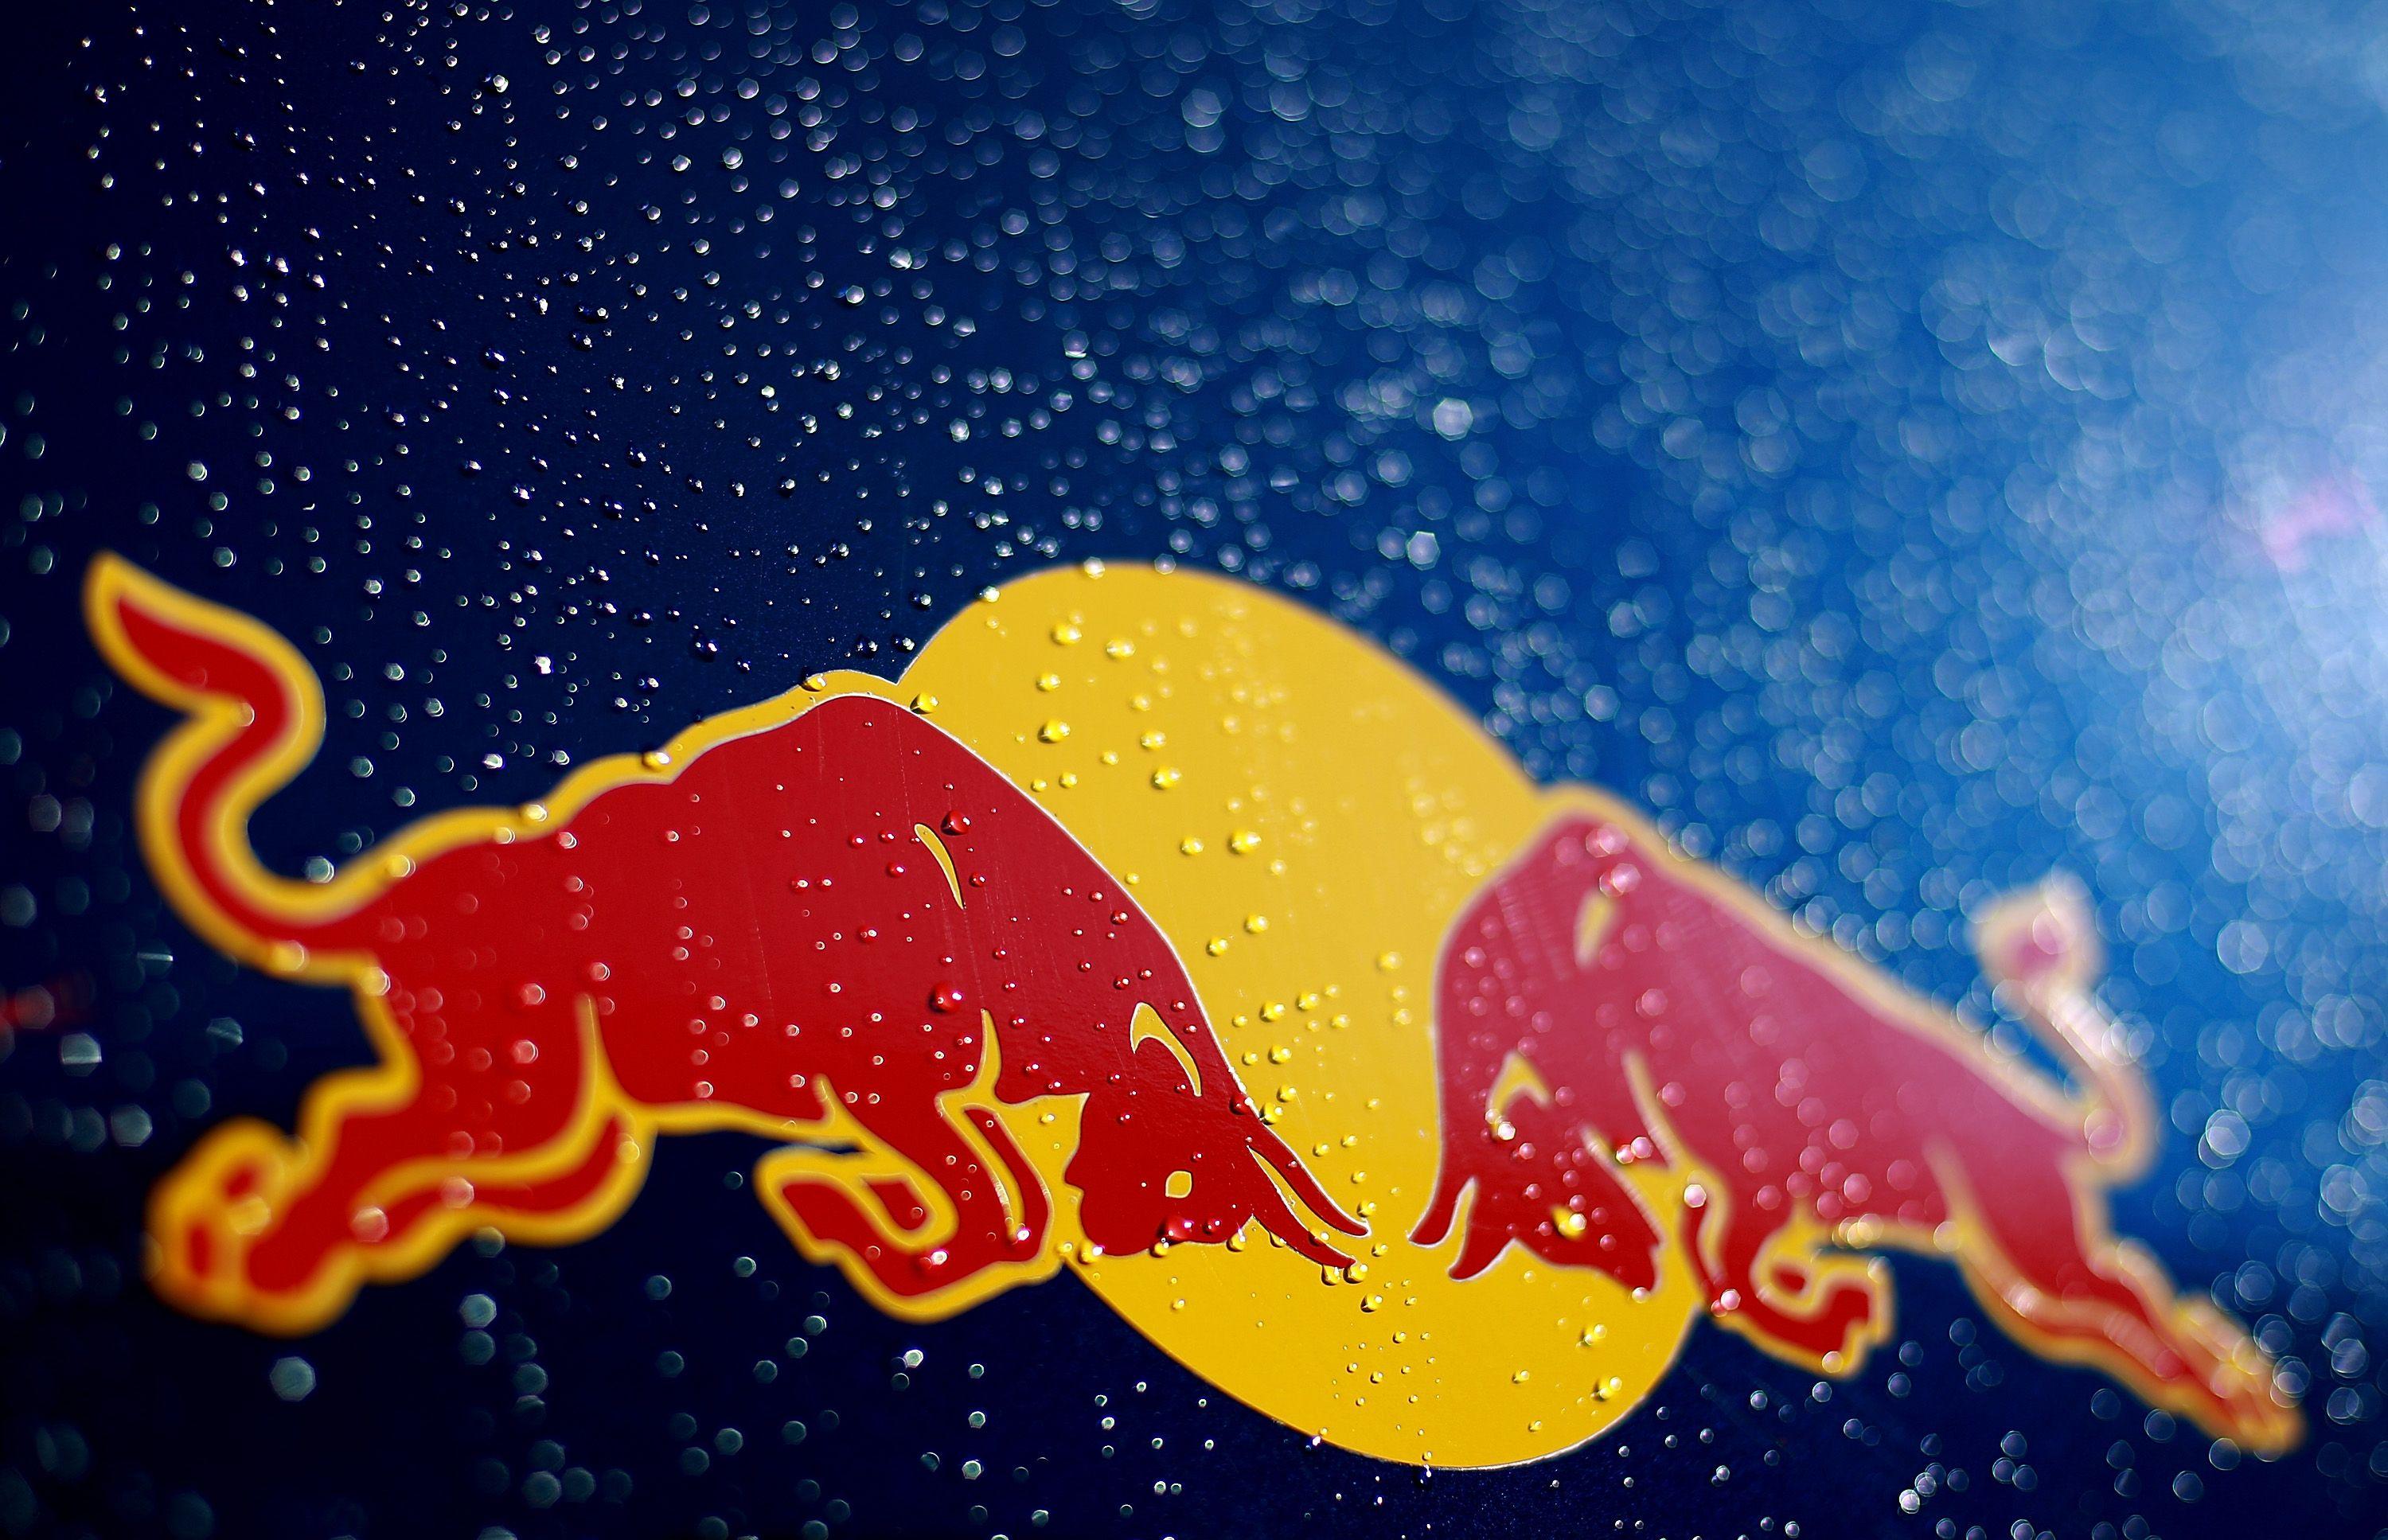 MotoGP: Red Bull Logo to appear on Honda Machines in 2015 and 2016